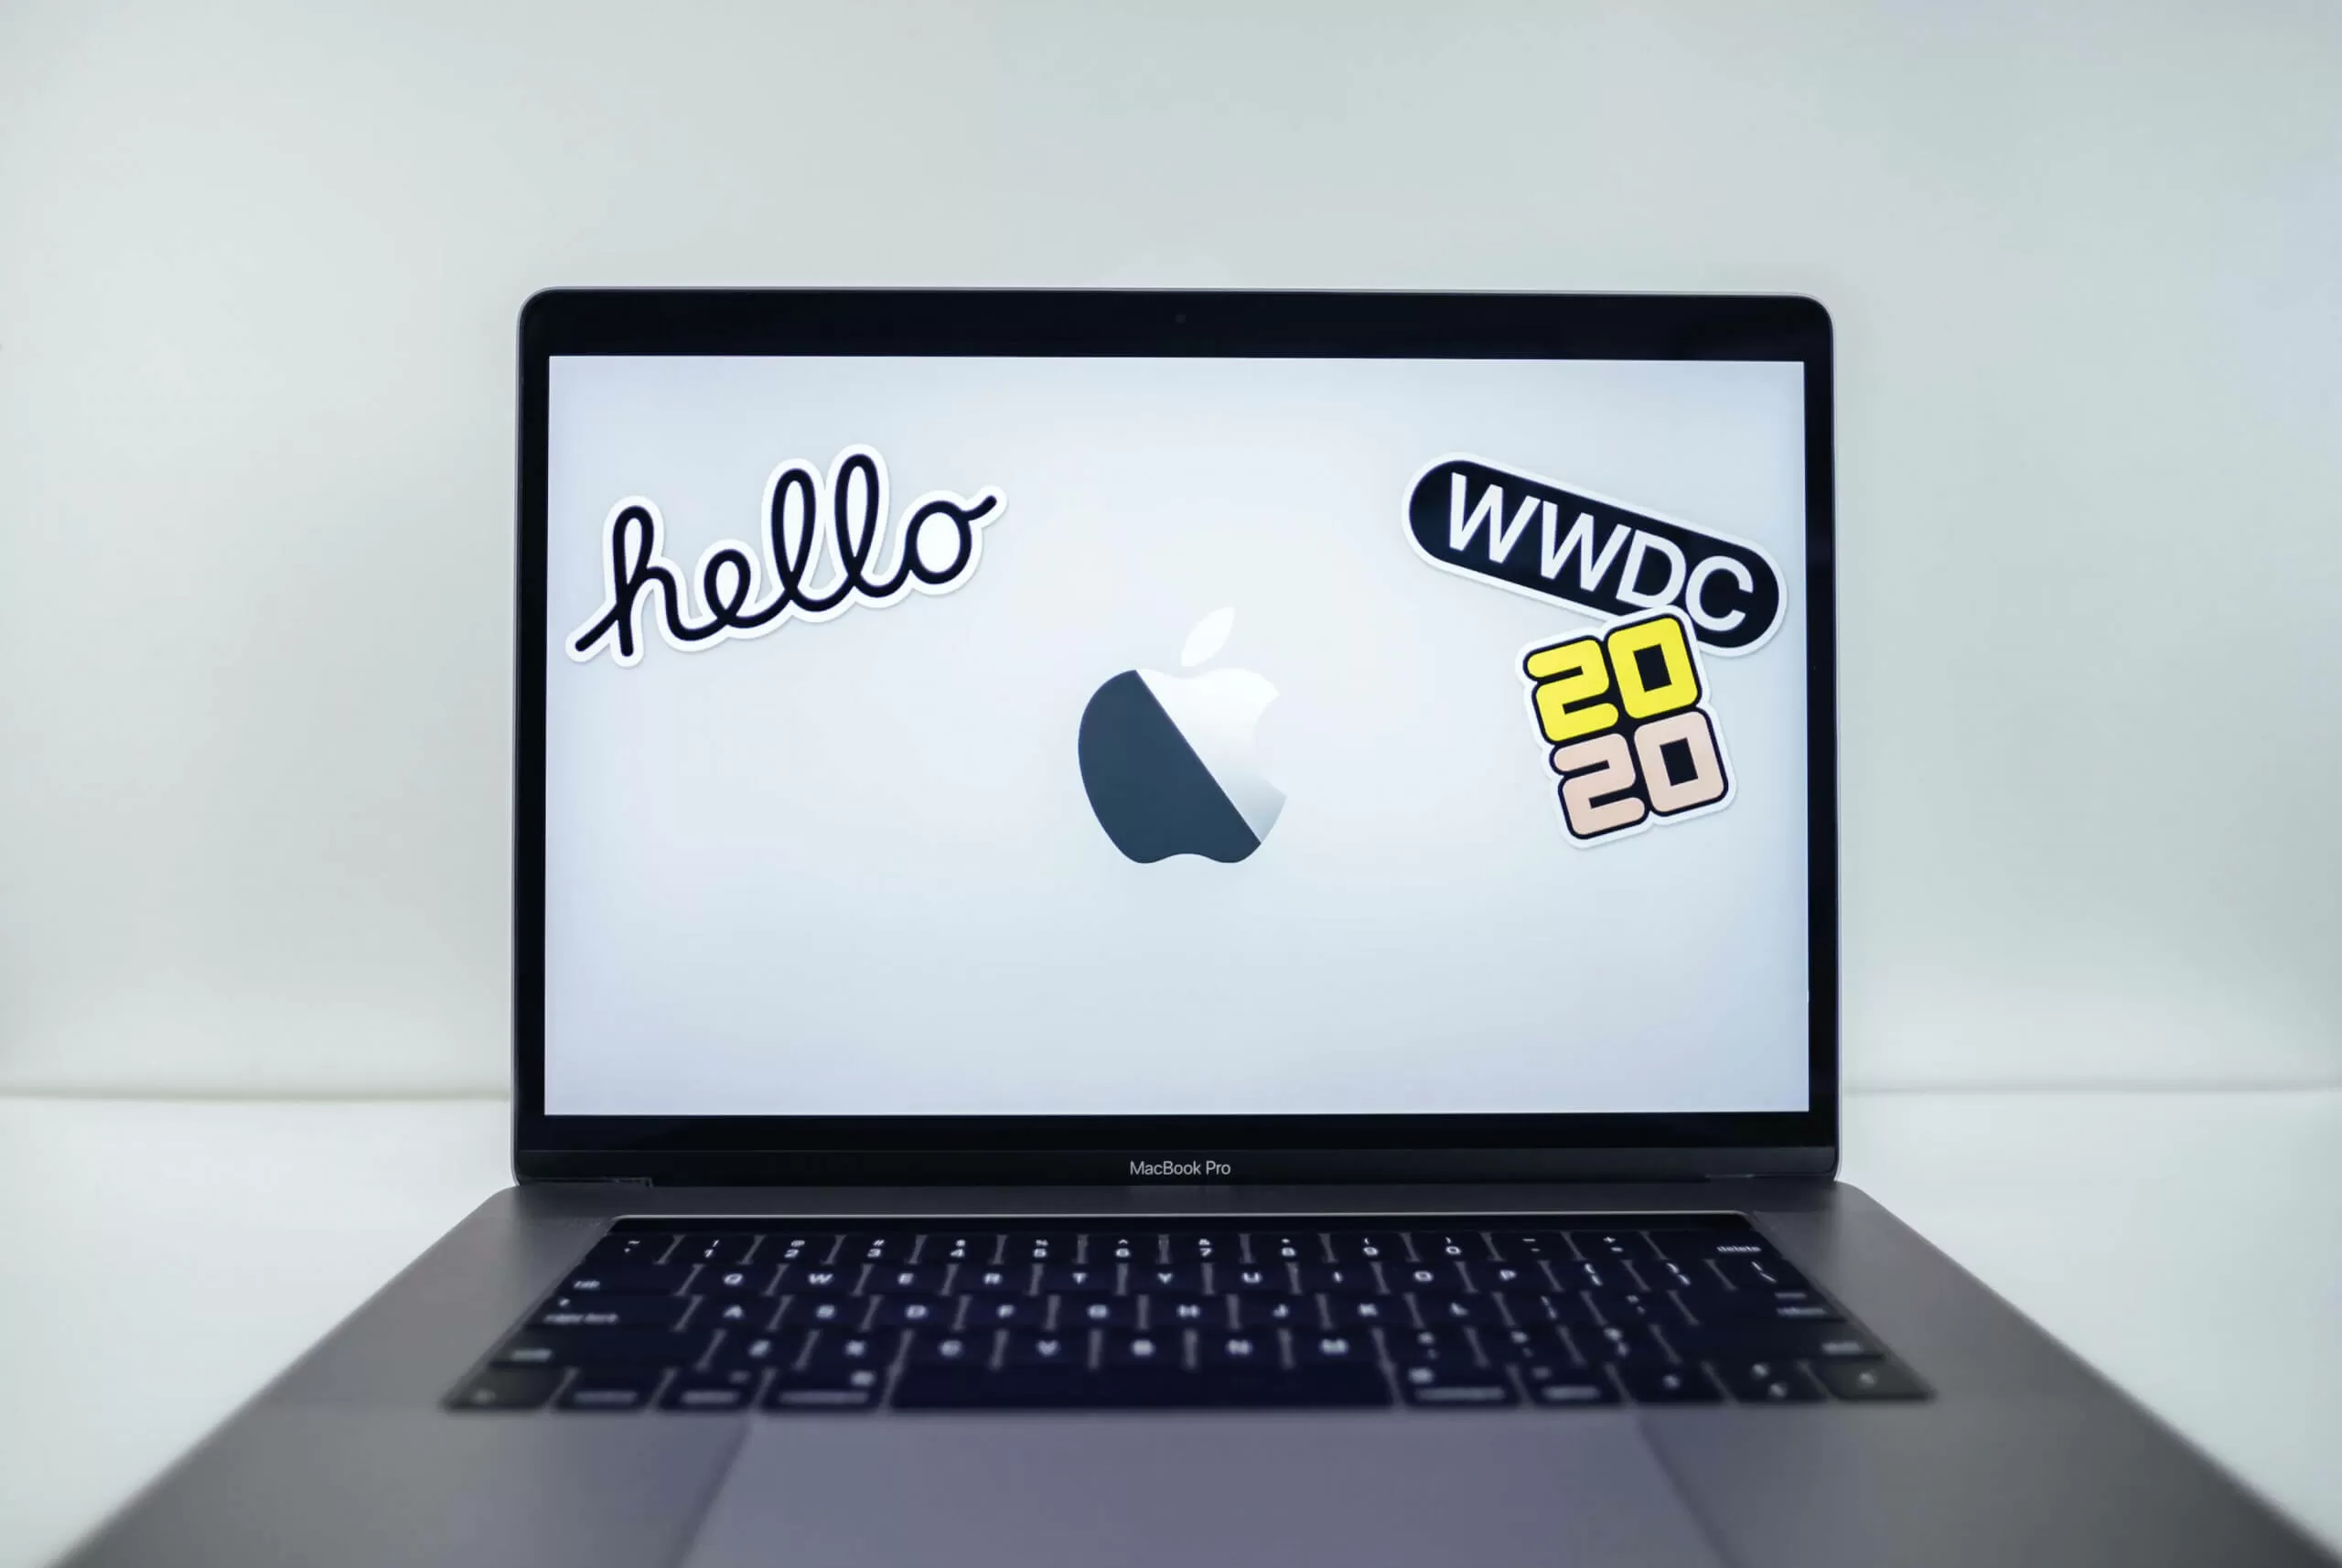 WWDC20 will still be the same five-day event, just online